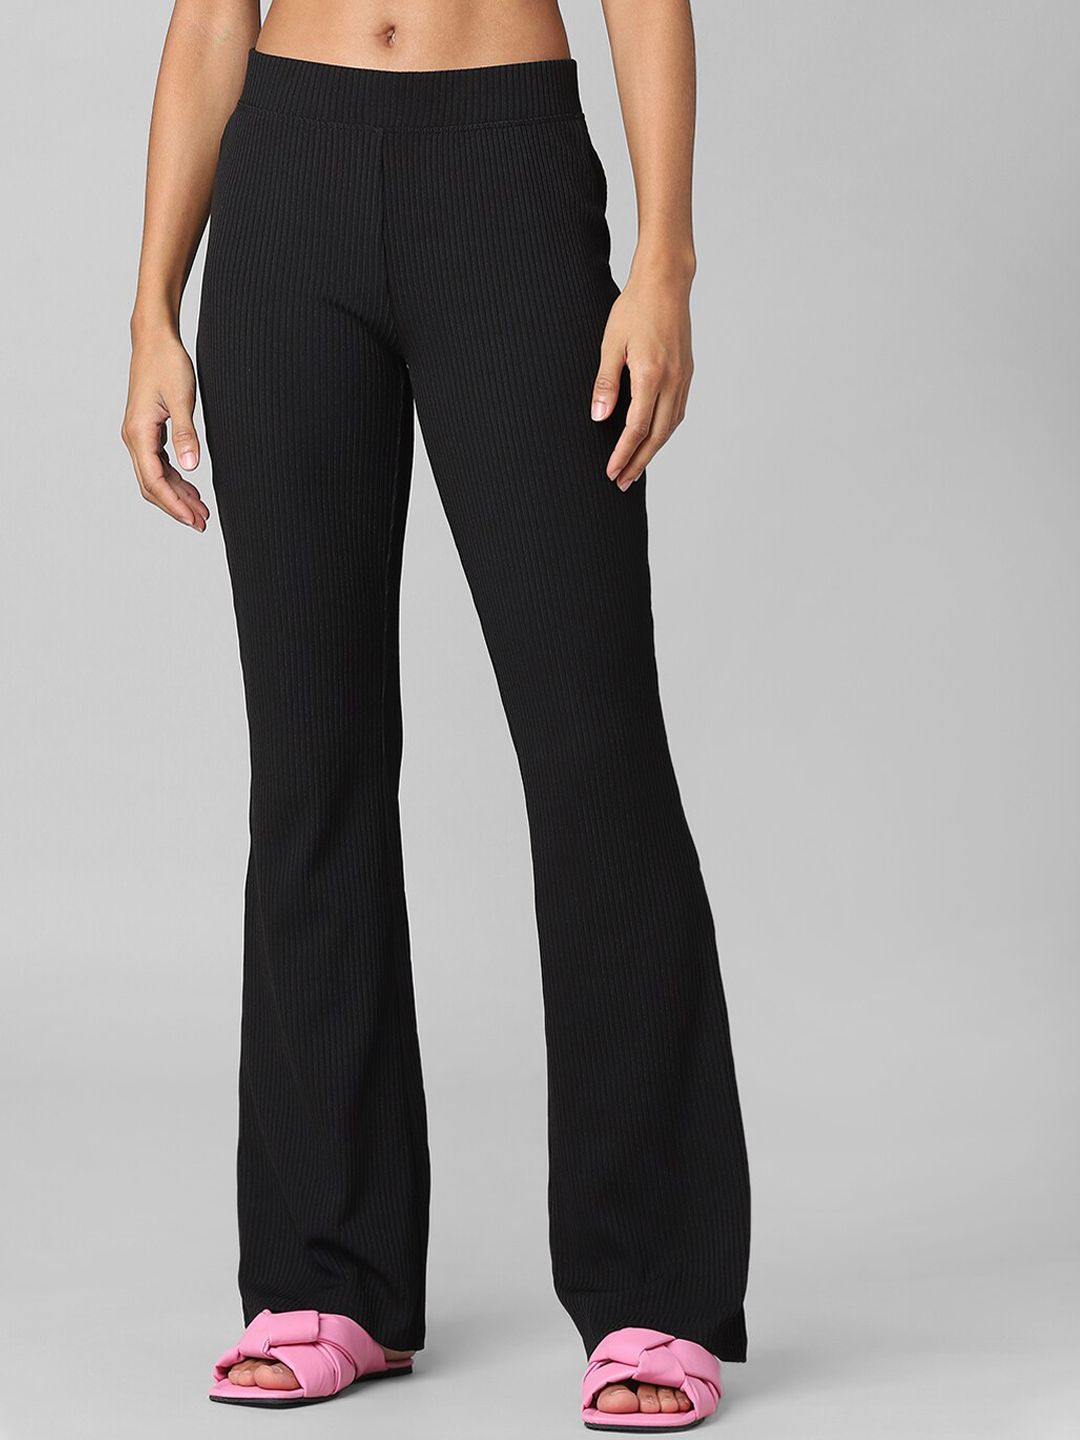 ONLY Women Black Striped Flared High-Rise Trousers Price in India